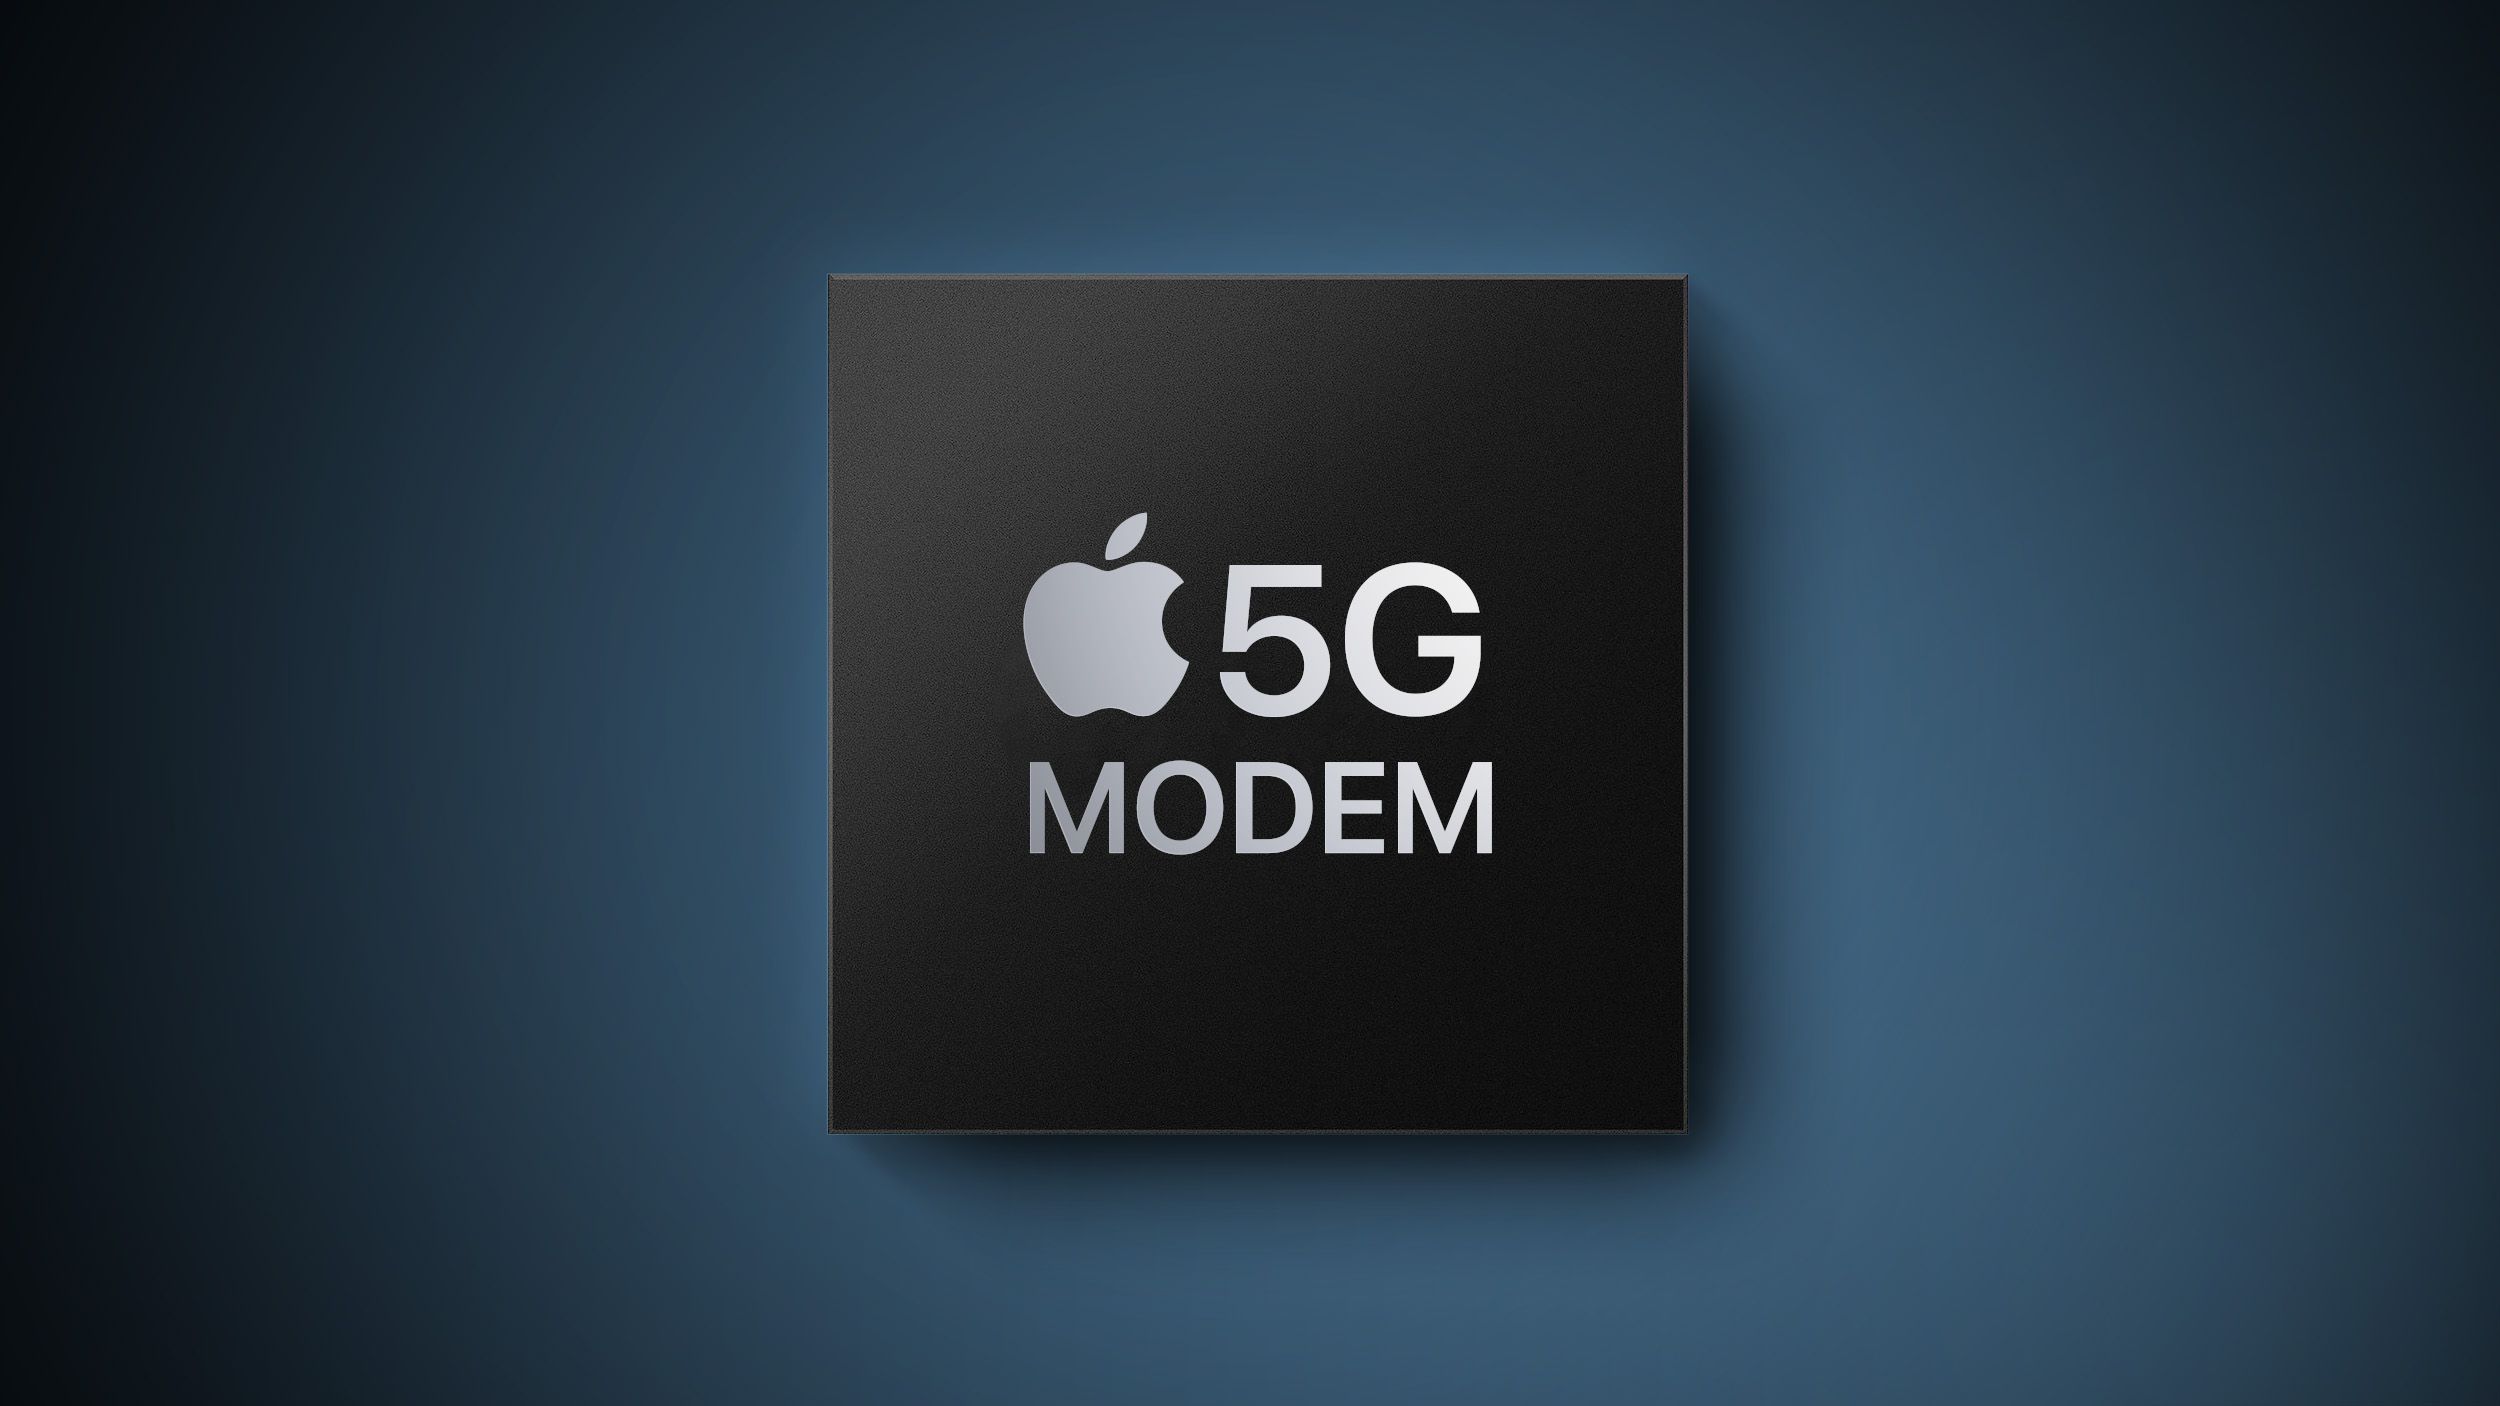 Apple's Rumored 5G Modem for iPhones Has Suppliers Competing for Orders - macrumors.com